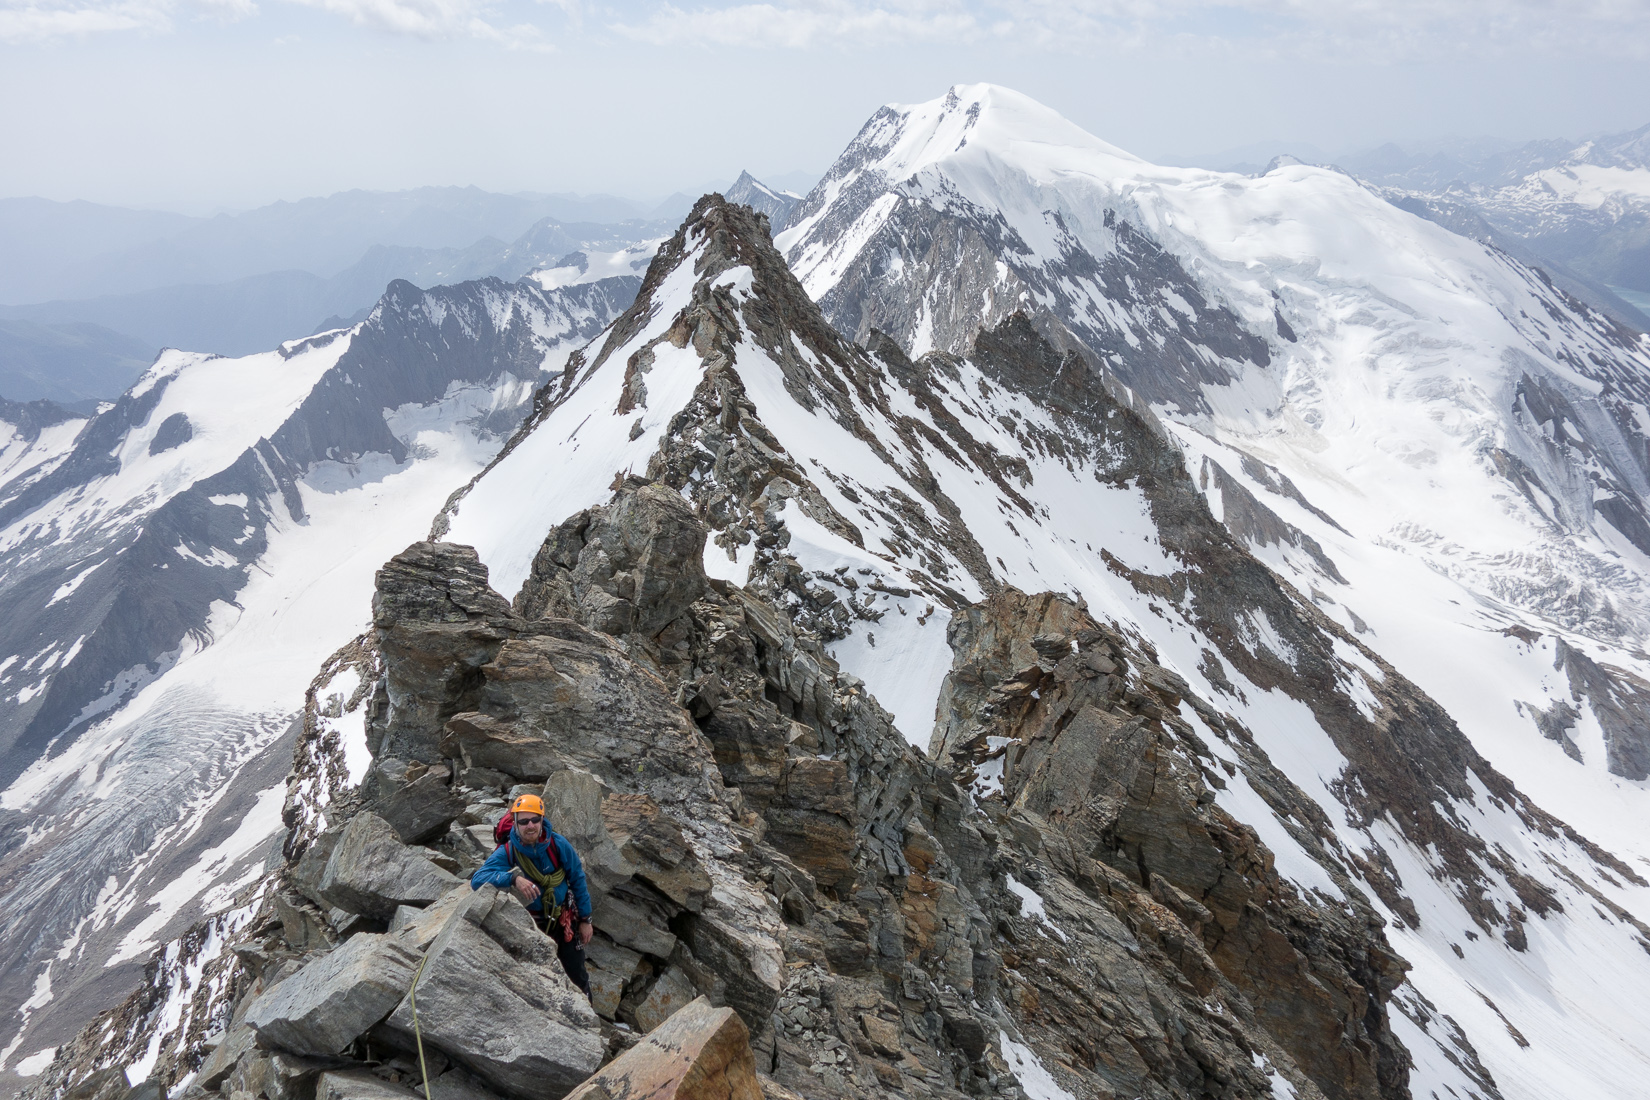 Nearing the top of the Lagginhorn